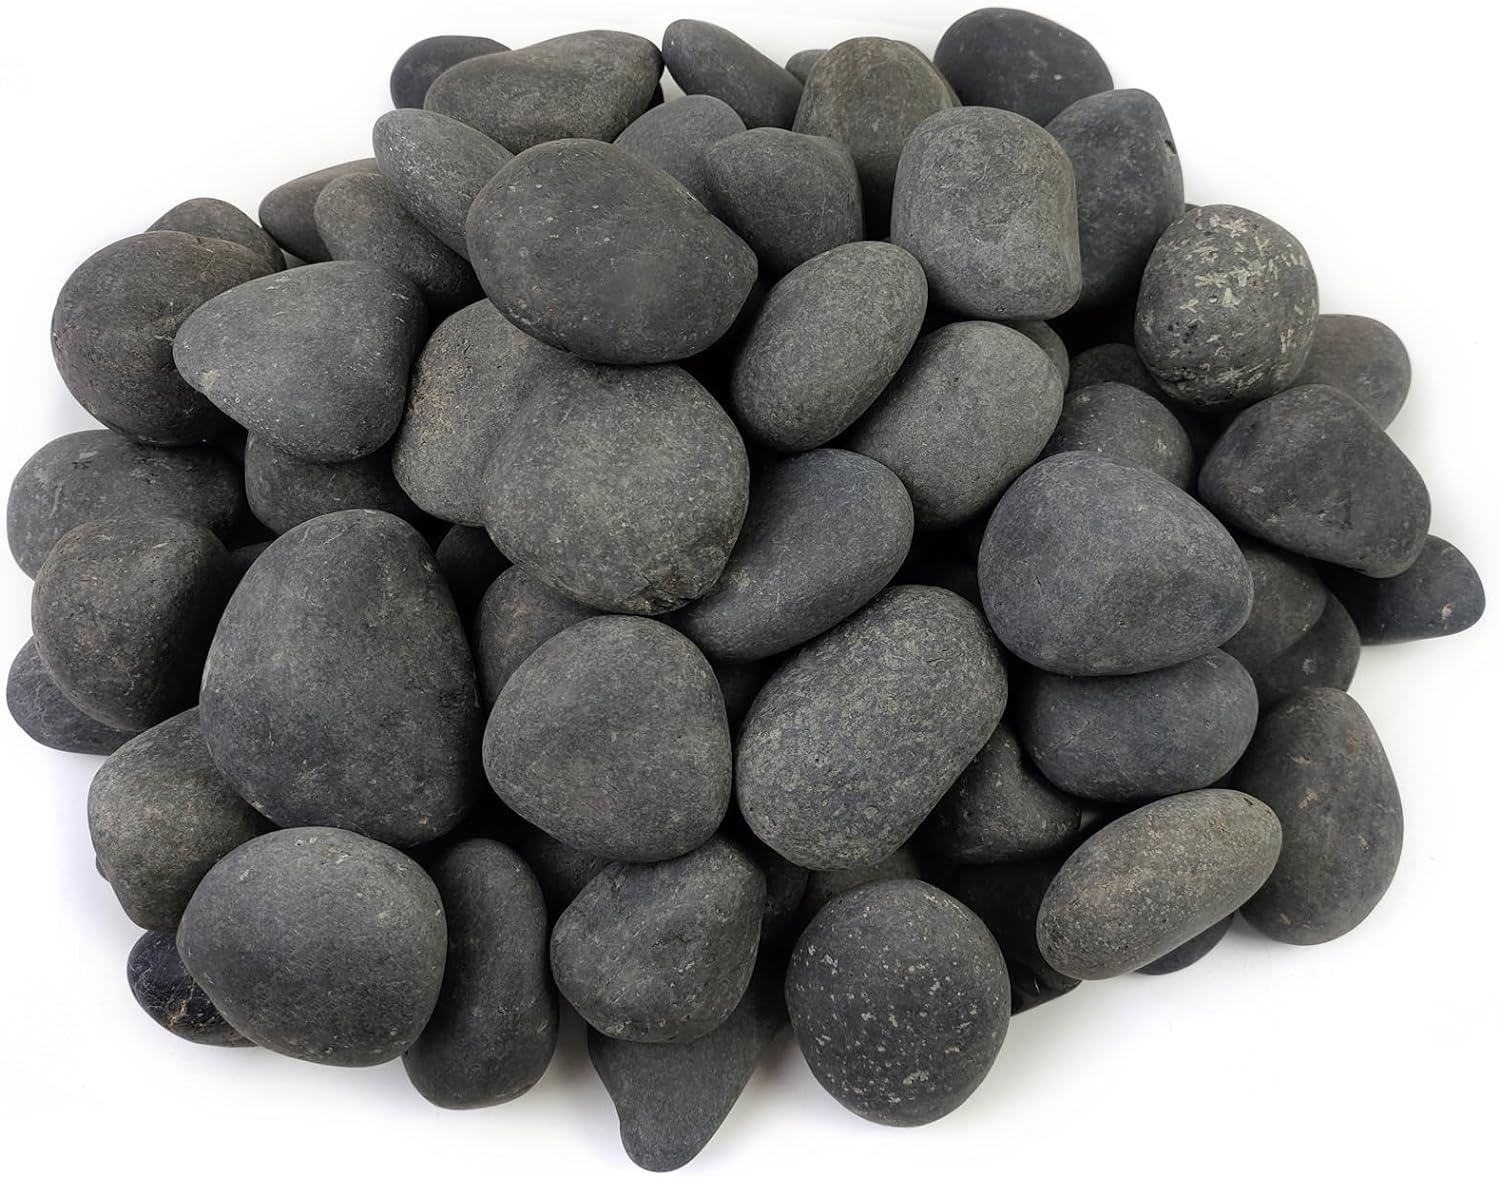 20 Lb Natural Unpolished Bulk Rocks Mexican Beach Pebbles, 2-3 Inch Decorative River Rocks for Landscaping Garden Paving Plant Rocks Crafting Walkways and Outdoor Decorative Stone